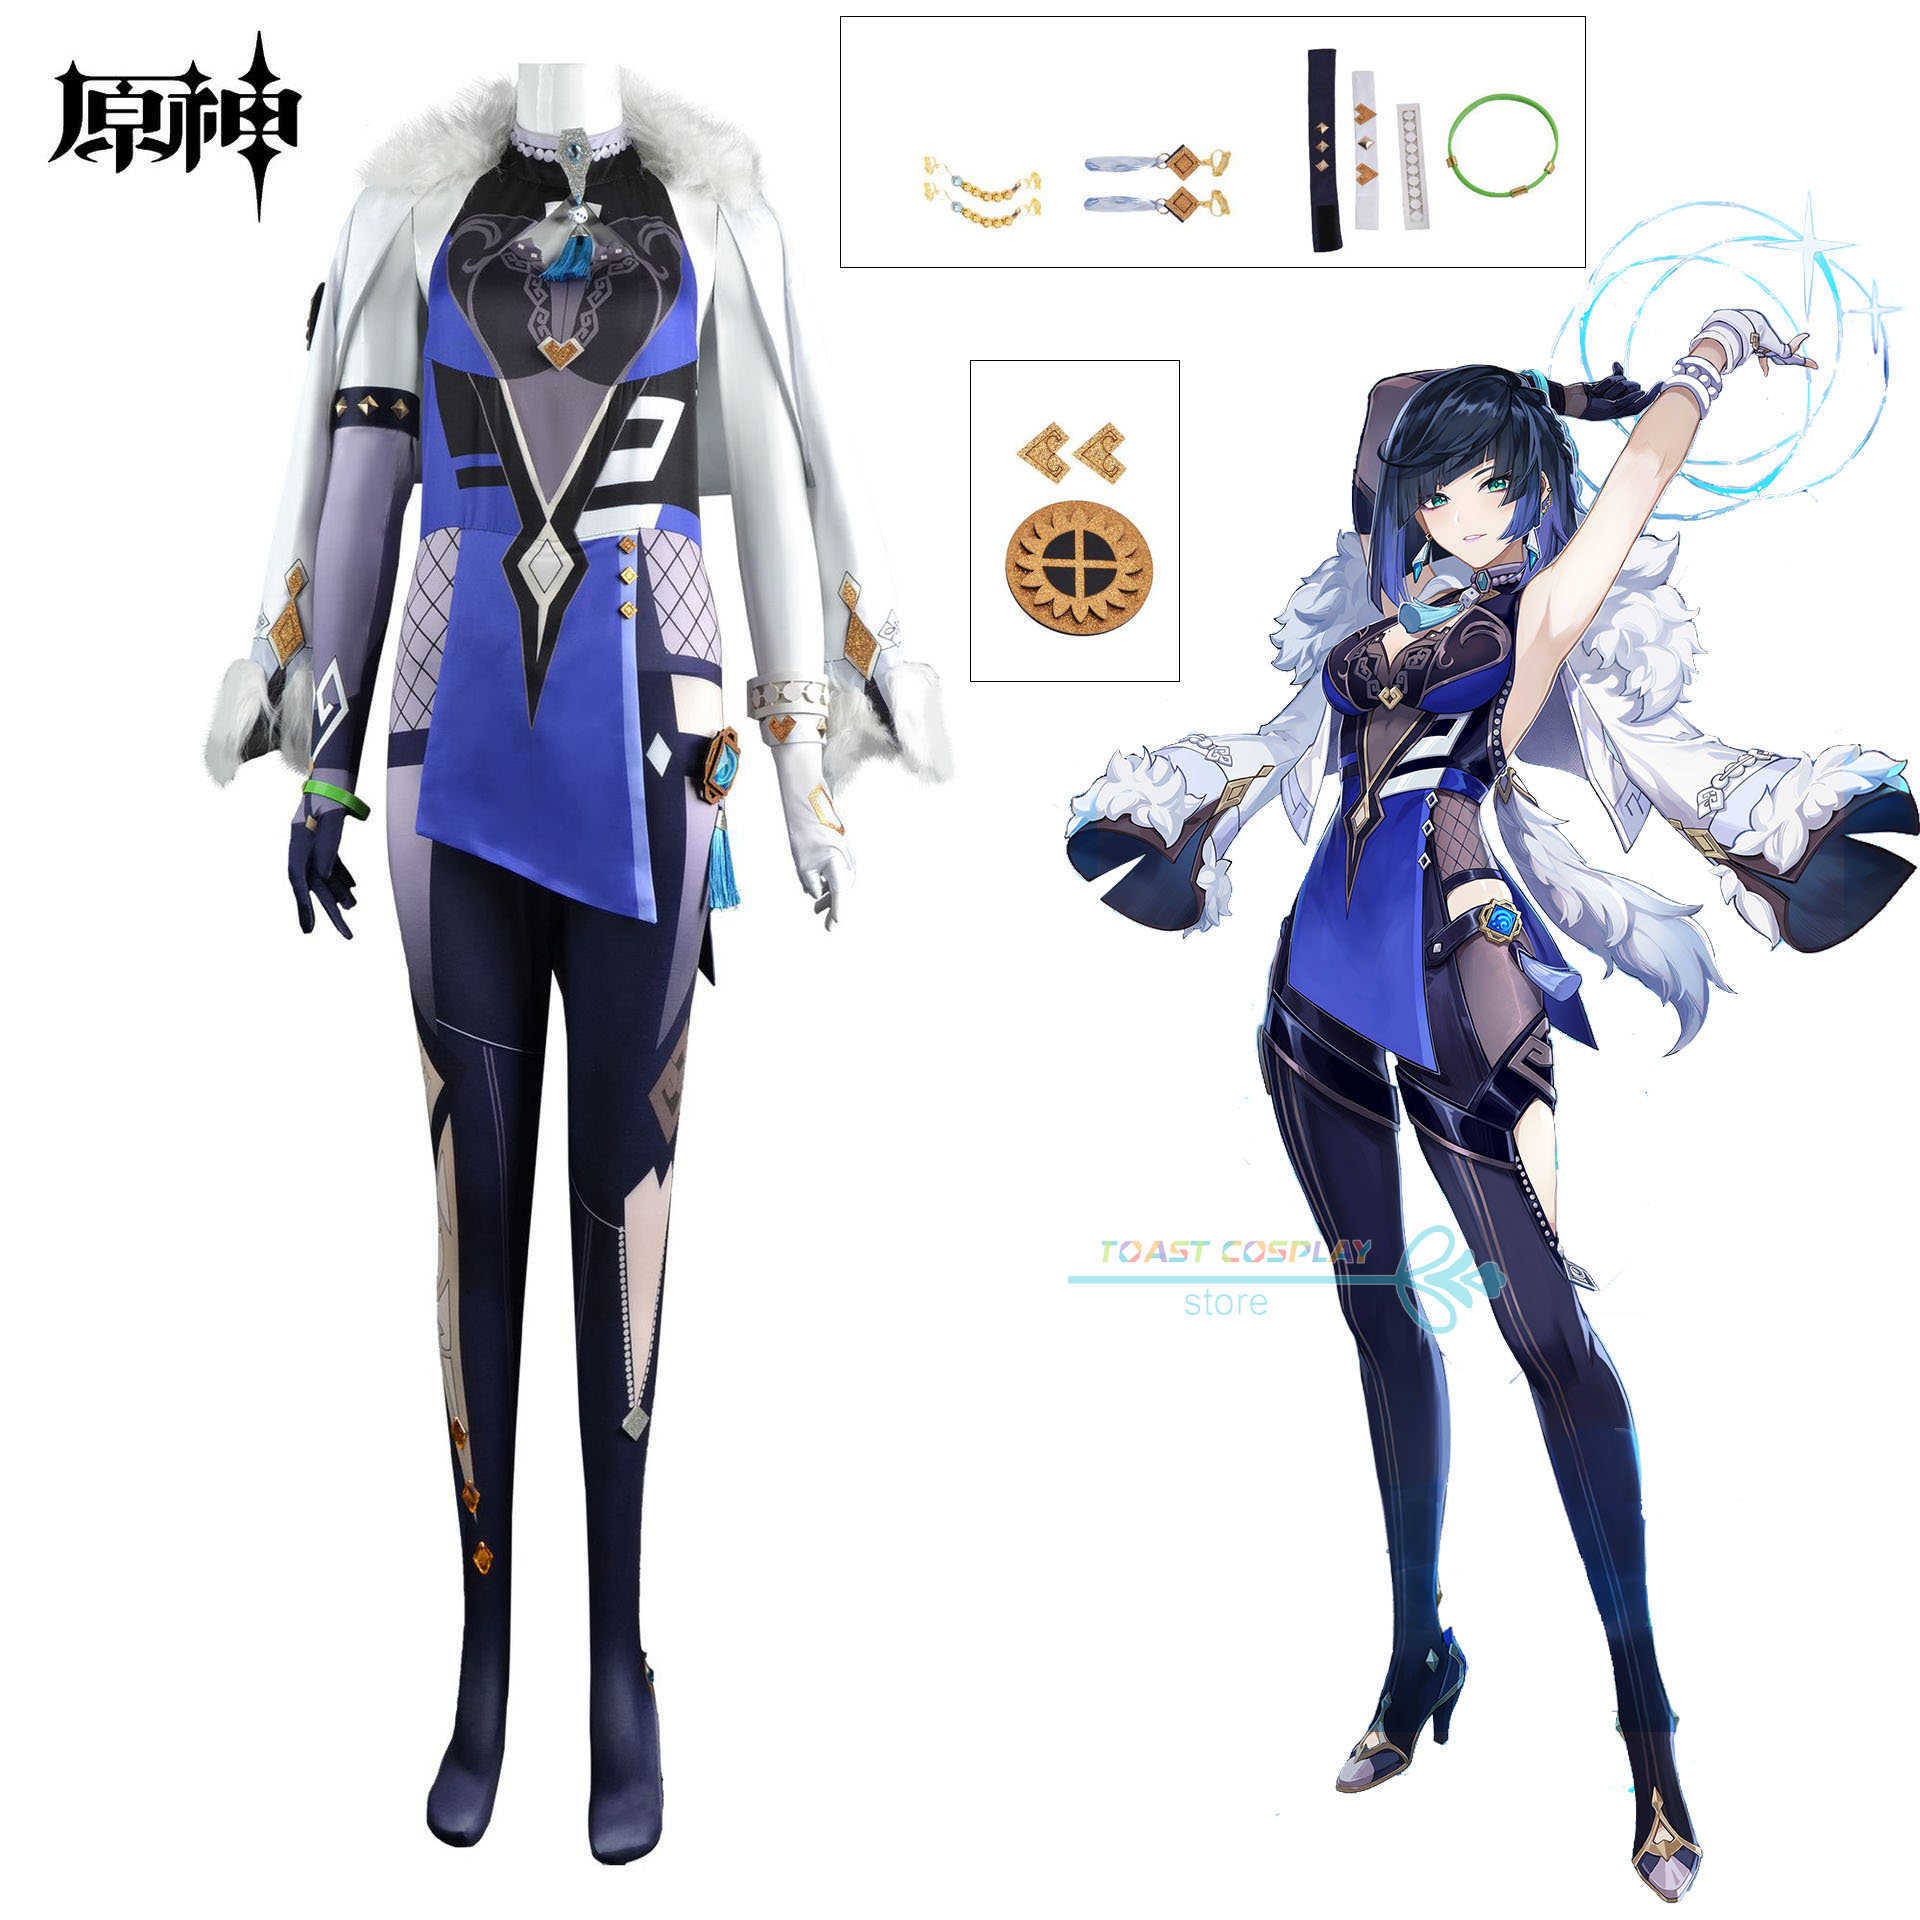 

Anime Costumes Game Genshin Impact Yelan Cosplay Come Sexy Lovely Uniform Halloween Party Outfit Wome Full Set Anime Role Play Z0602